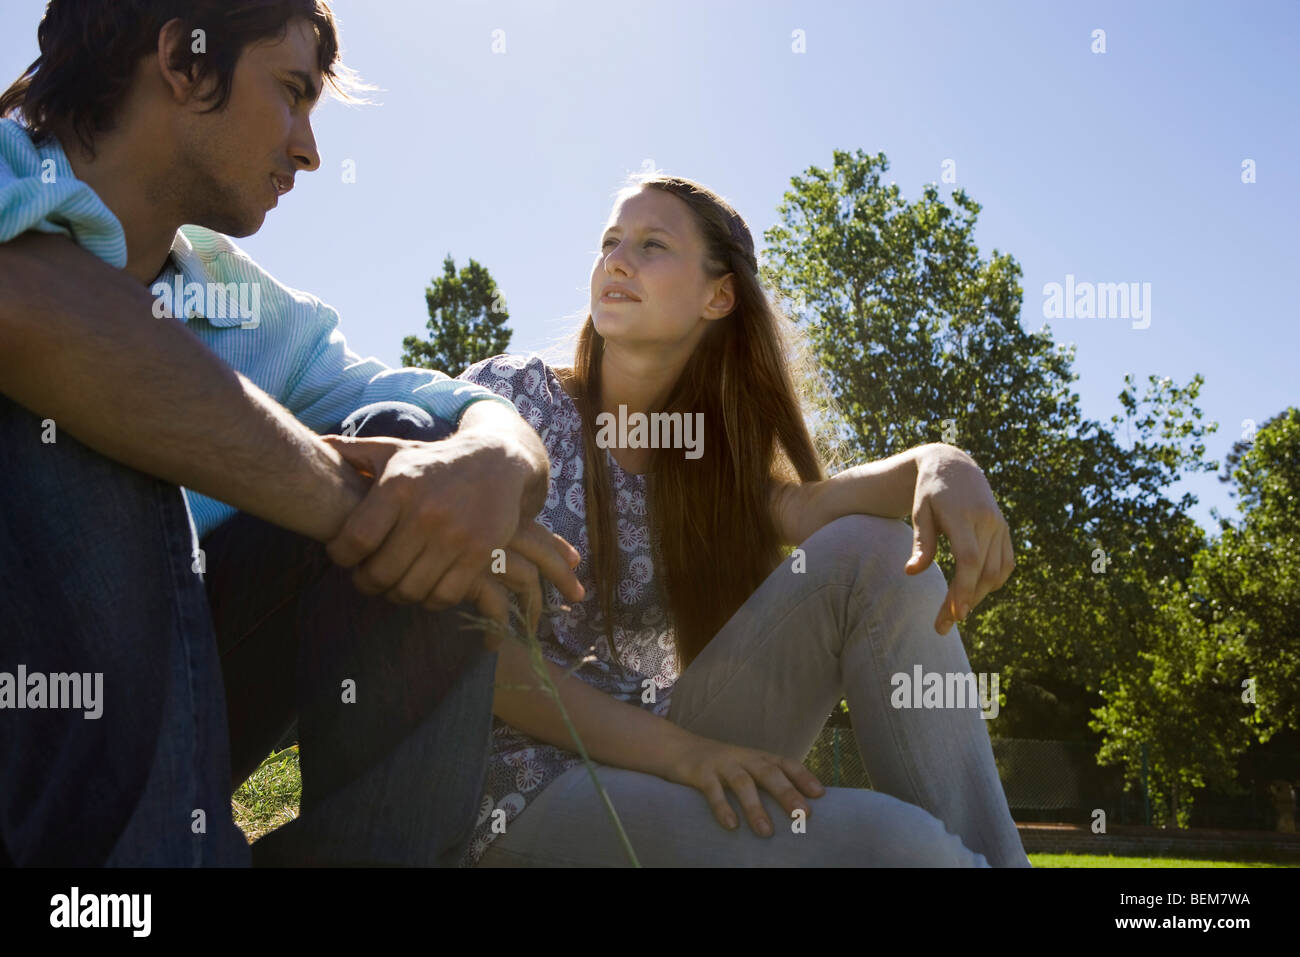 Young couple talking together outdoors Stock Photo